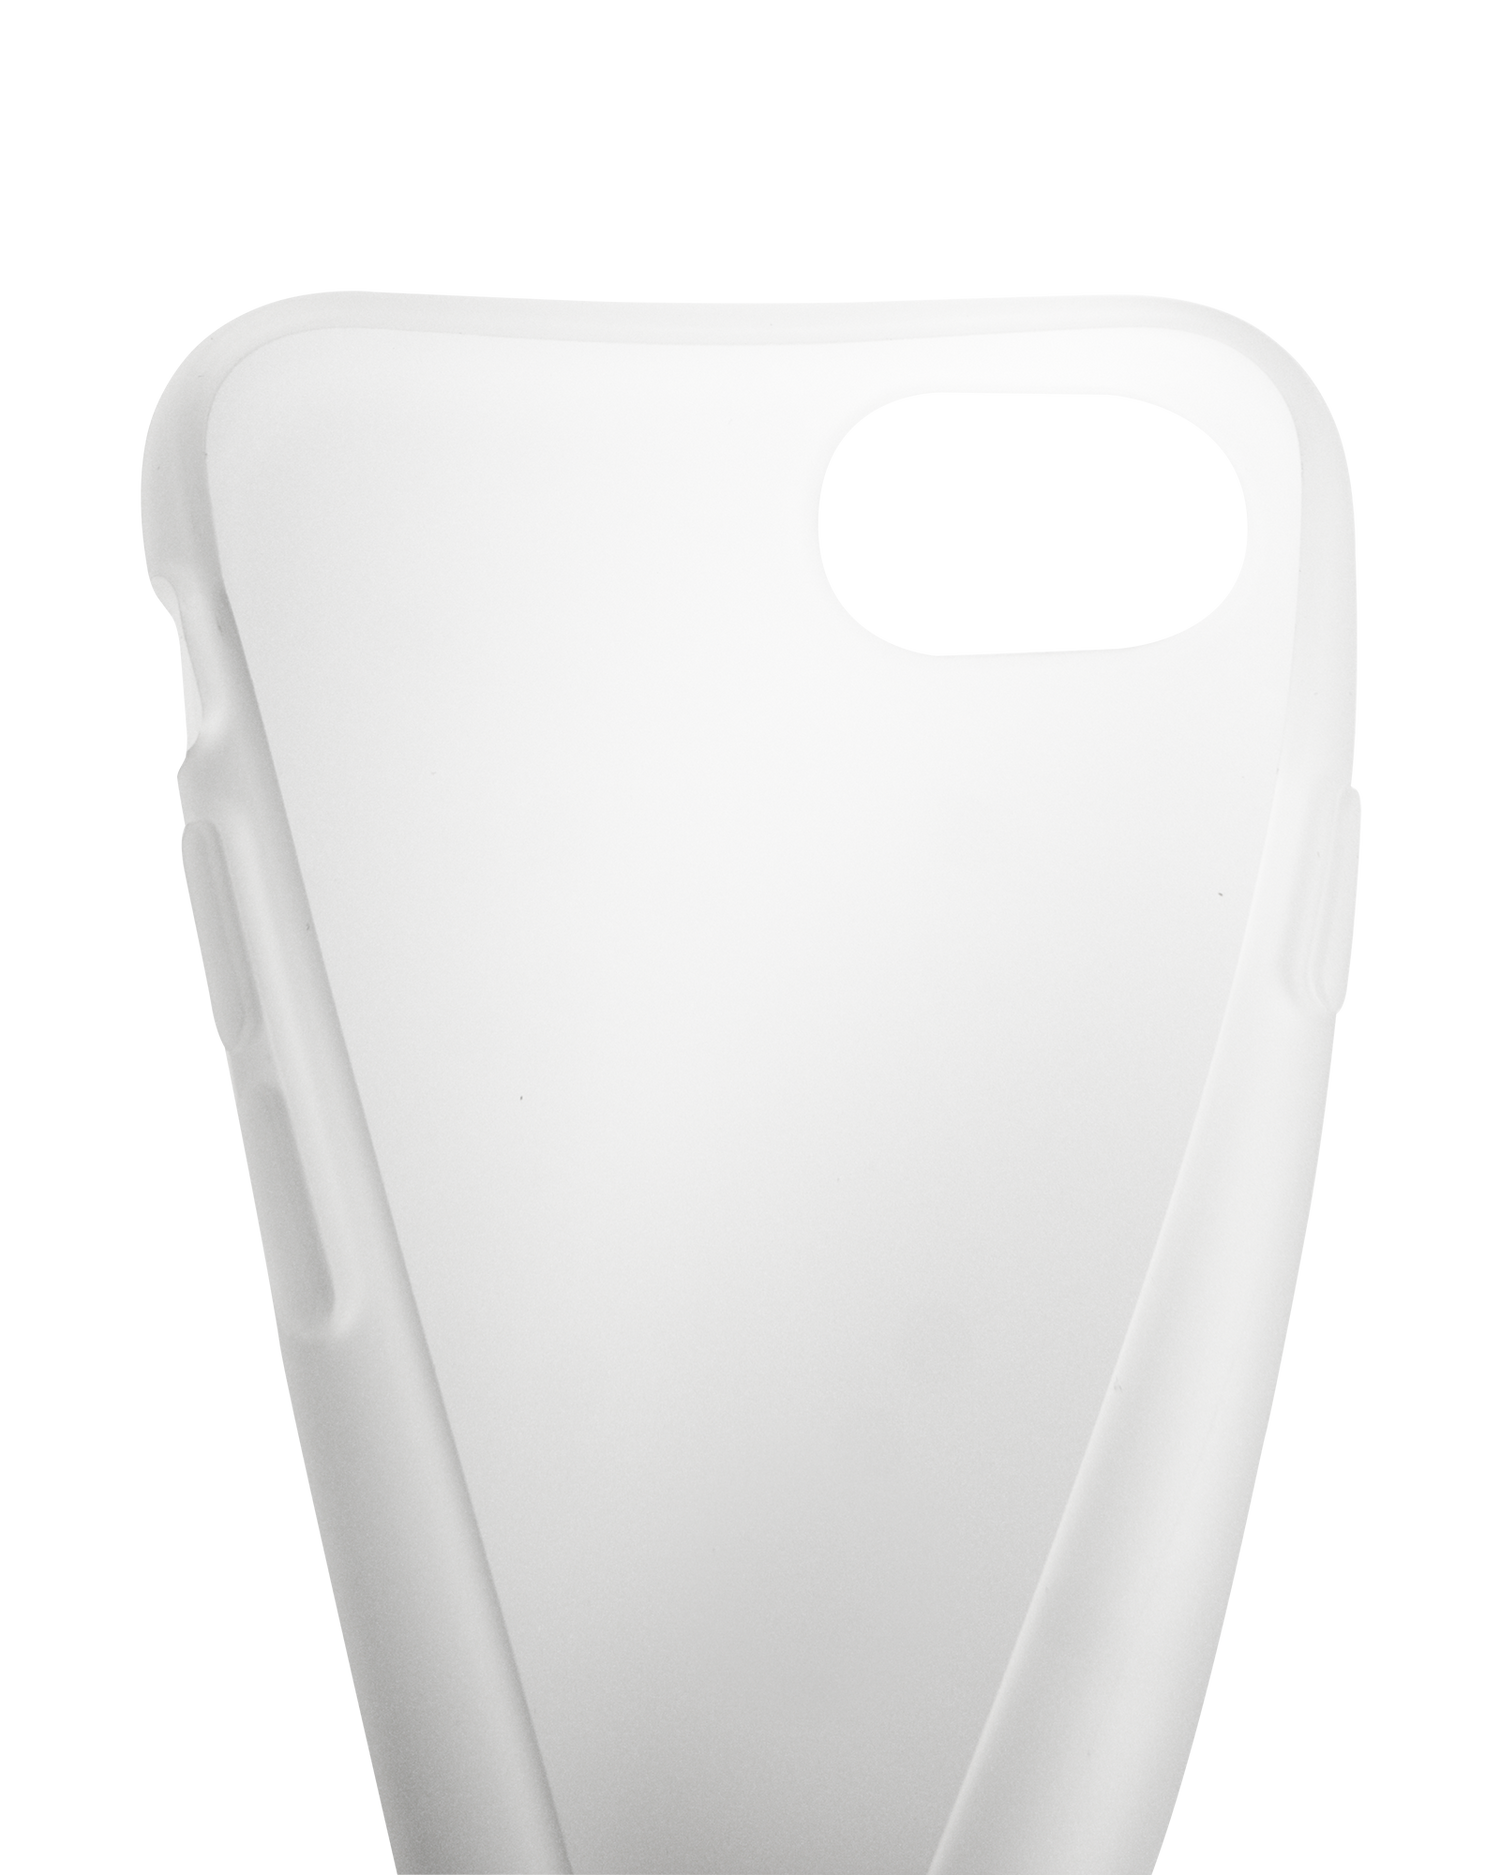 Apple iPhone 8 Silicone Case - White for sale online